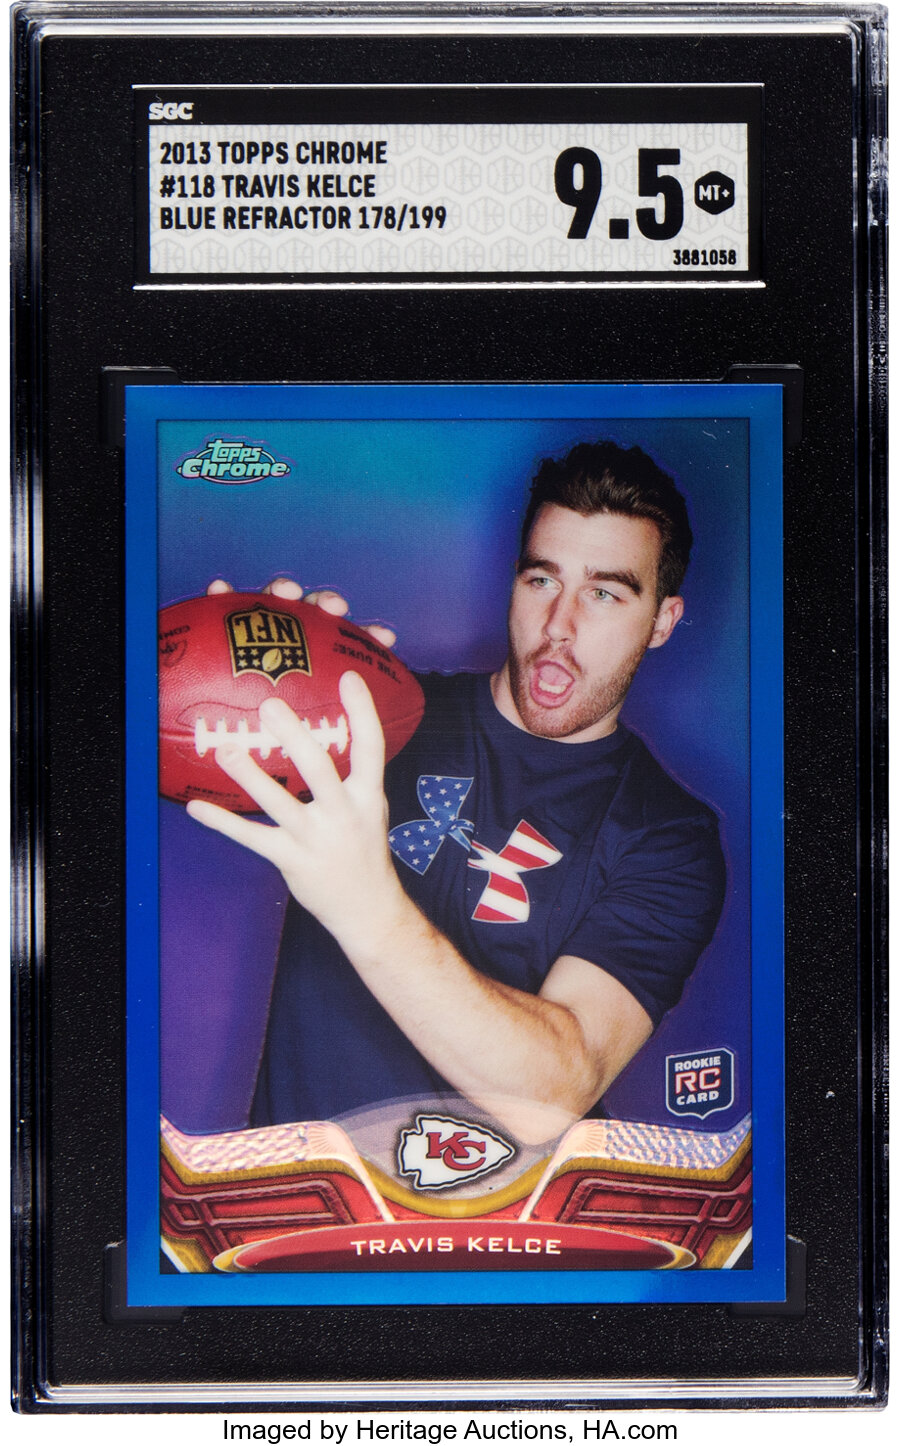 2013 Topps Chrome Travis Kelce Rookie #118 SGC Authentic Blue Refractor Variant Graded SGC Mint+ 9.5 - #'d 178/199